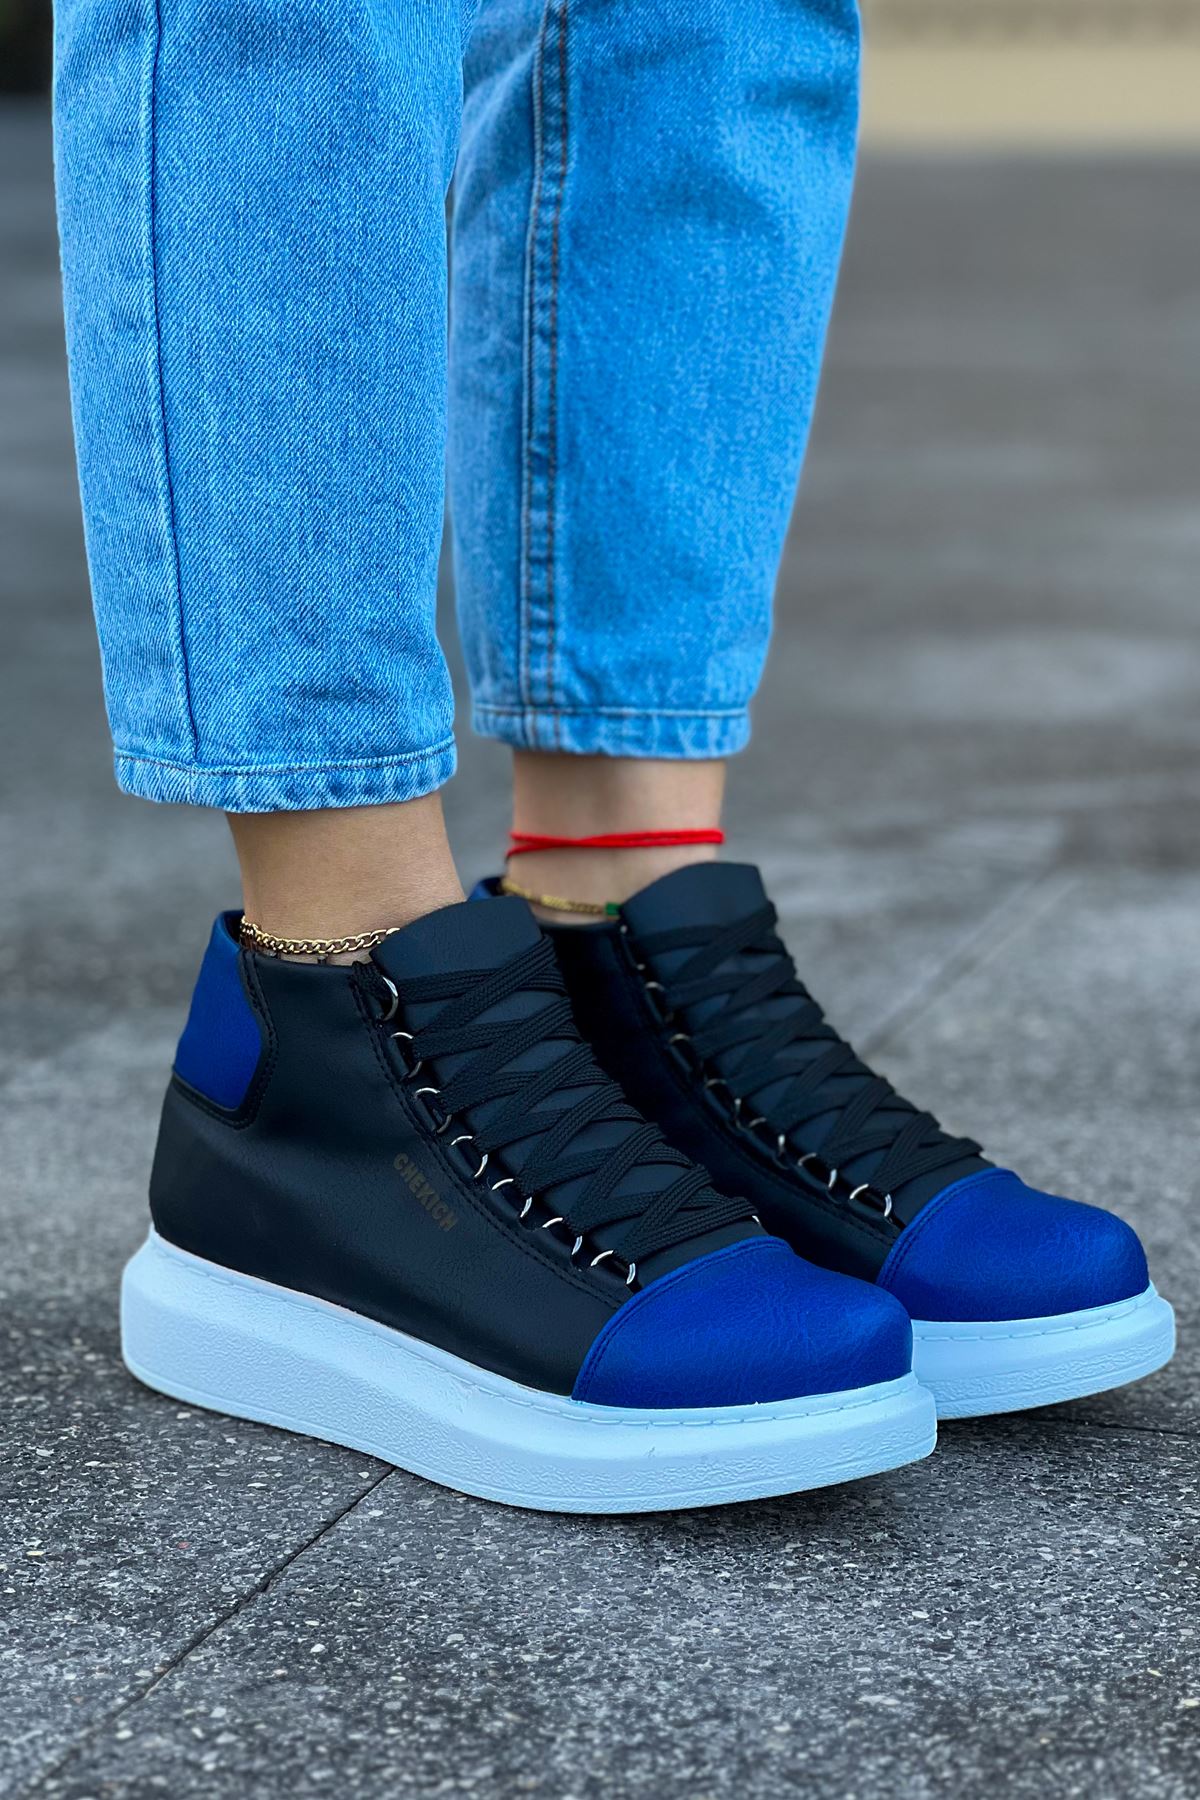 CH258 GBT Roma Colorful Women's Boots BLACK/SAX BLUE - STREETMODE™